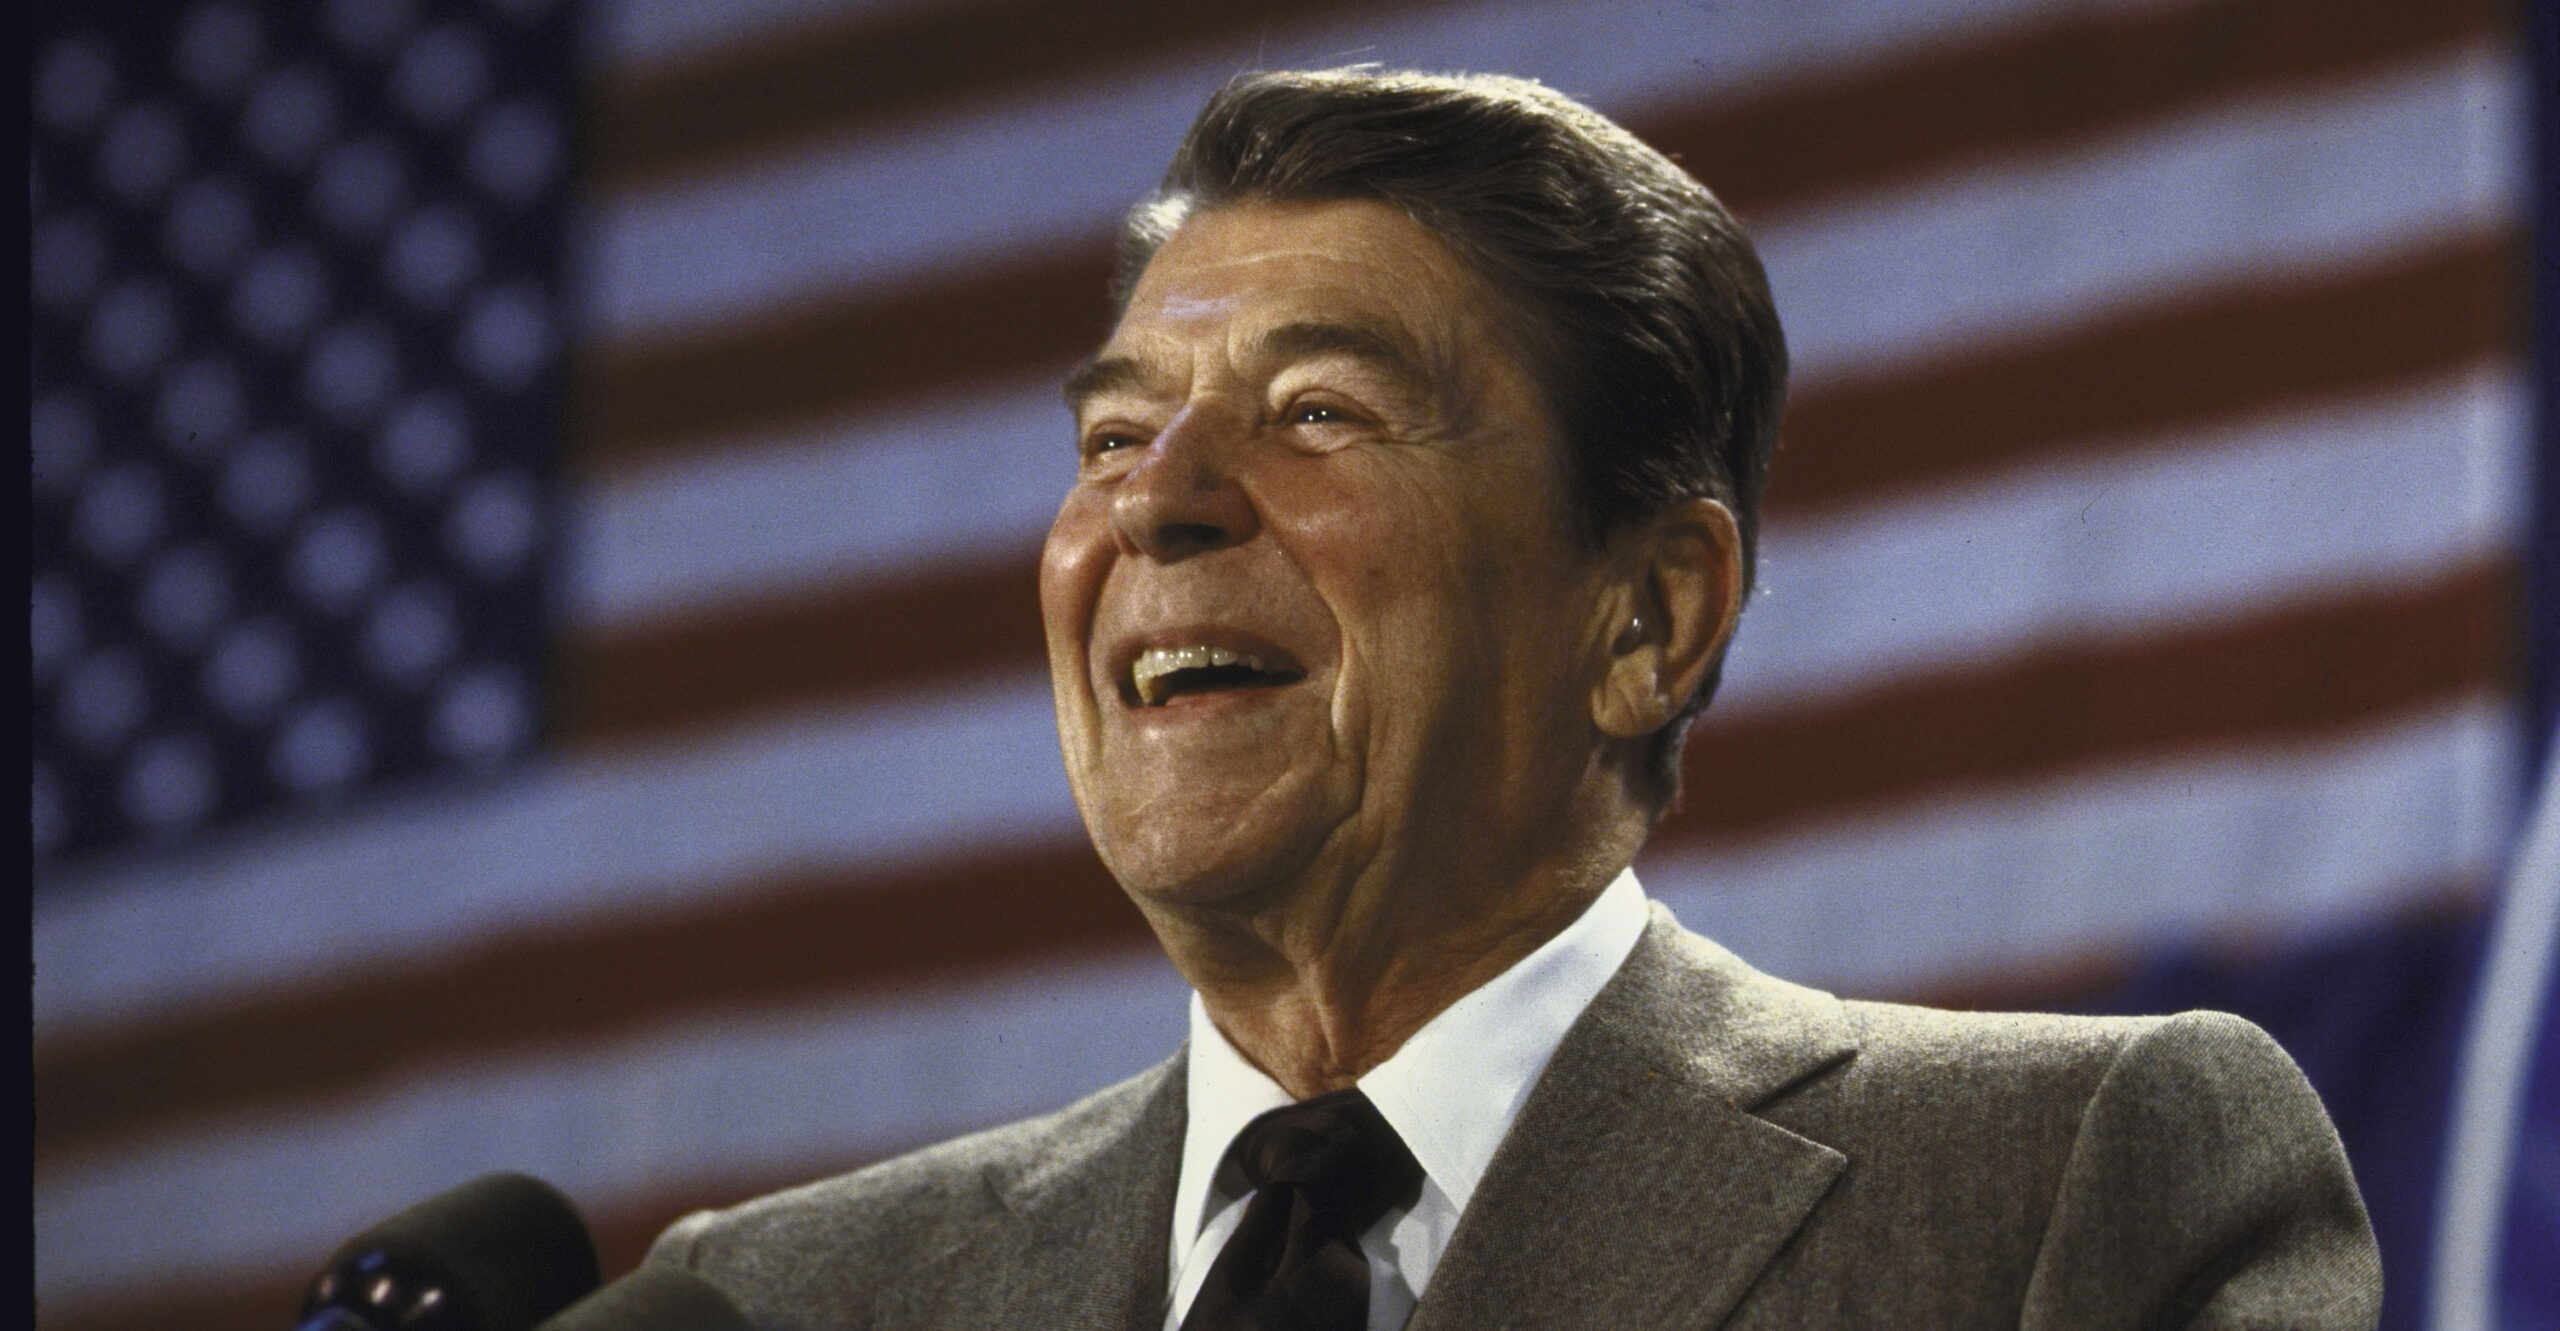 Biden Ed Secretary's Reagan Misquote Perfectly Illustrates Ignorance of Our Failed Ruling Class